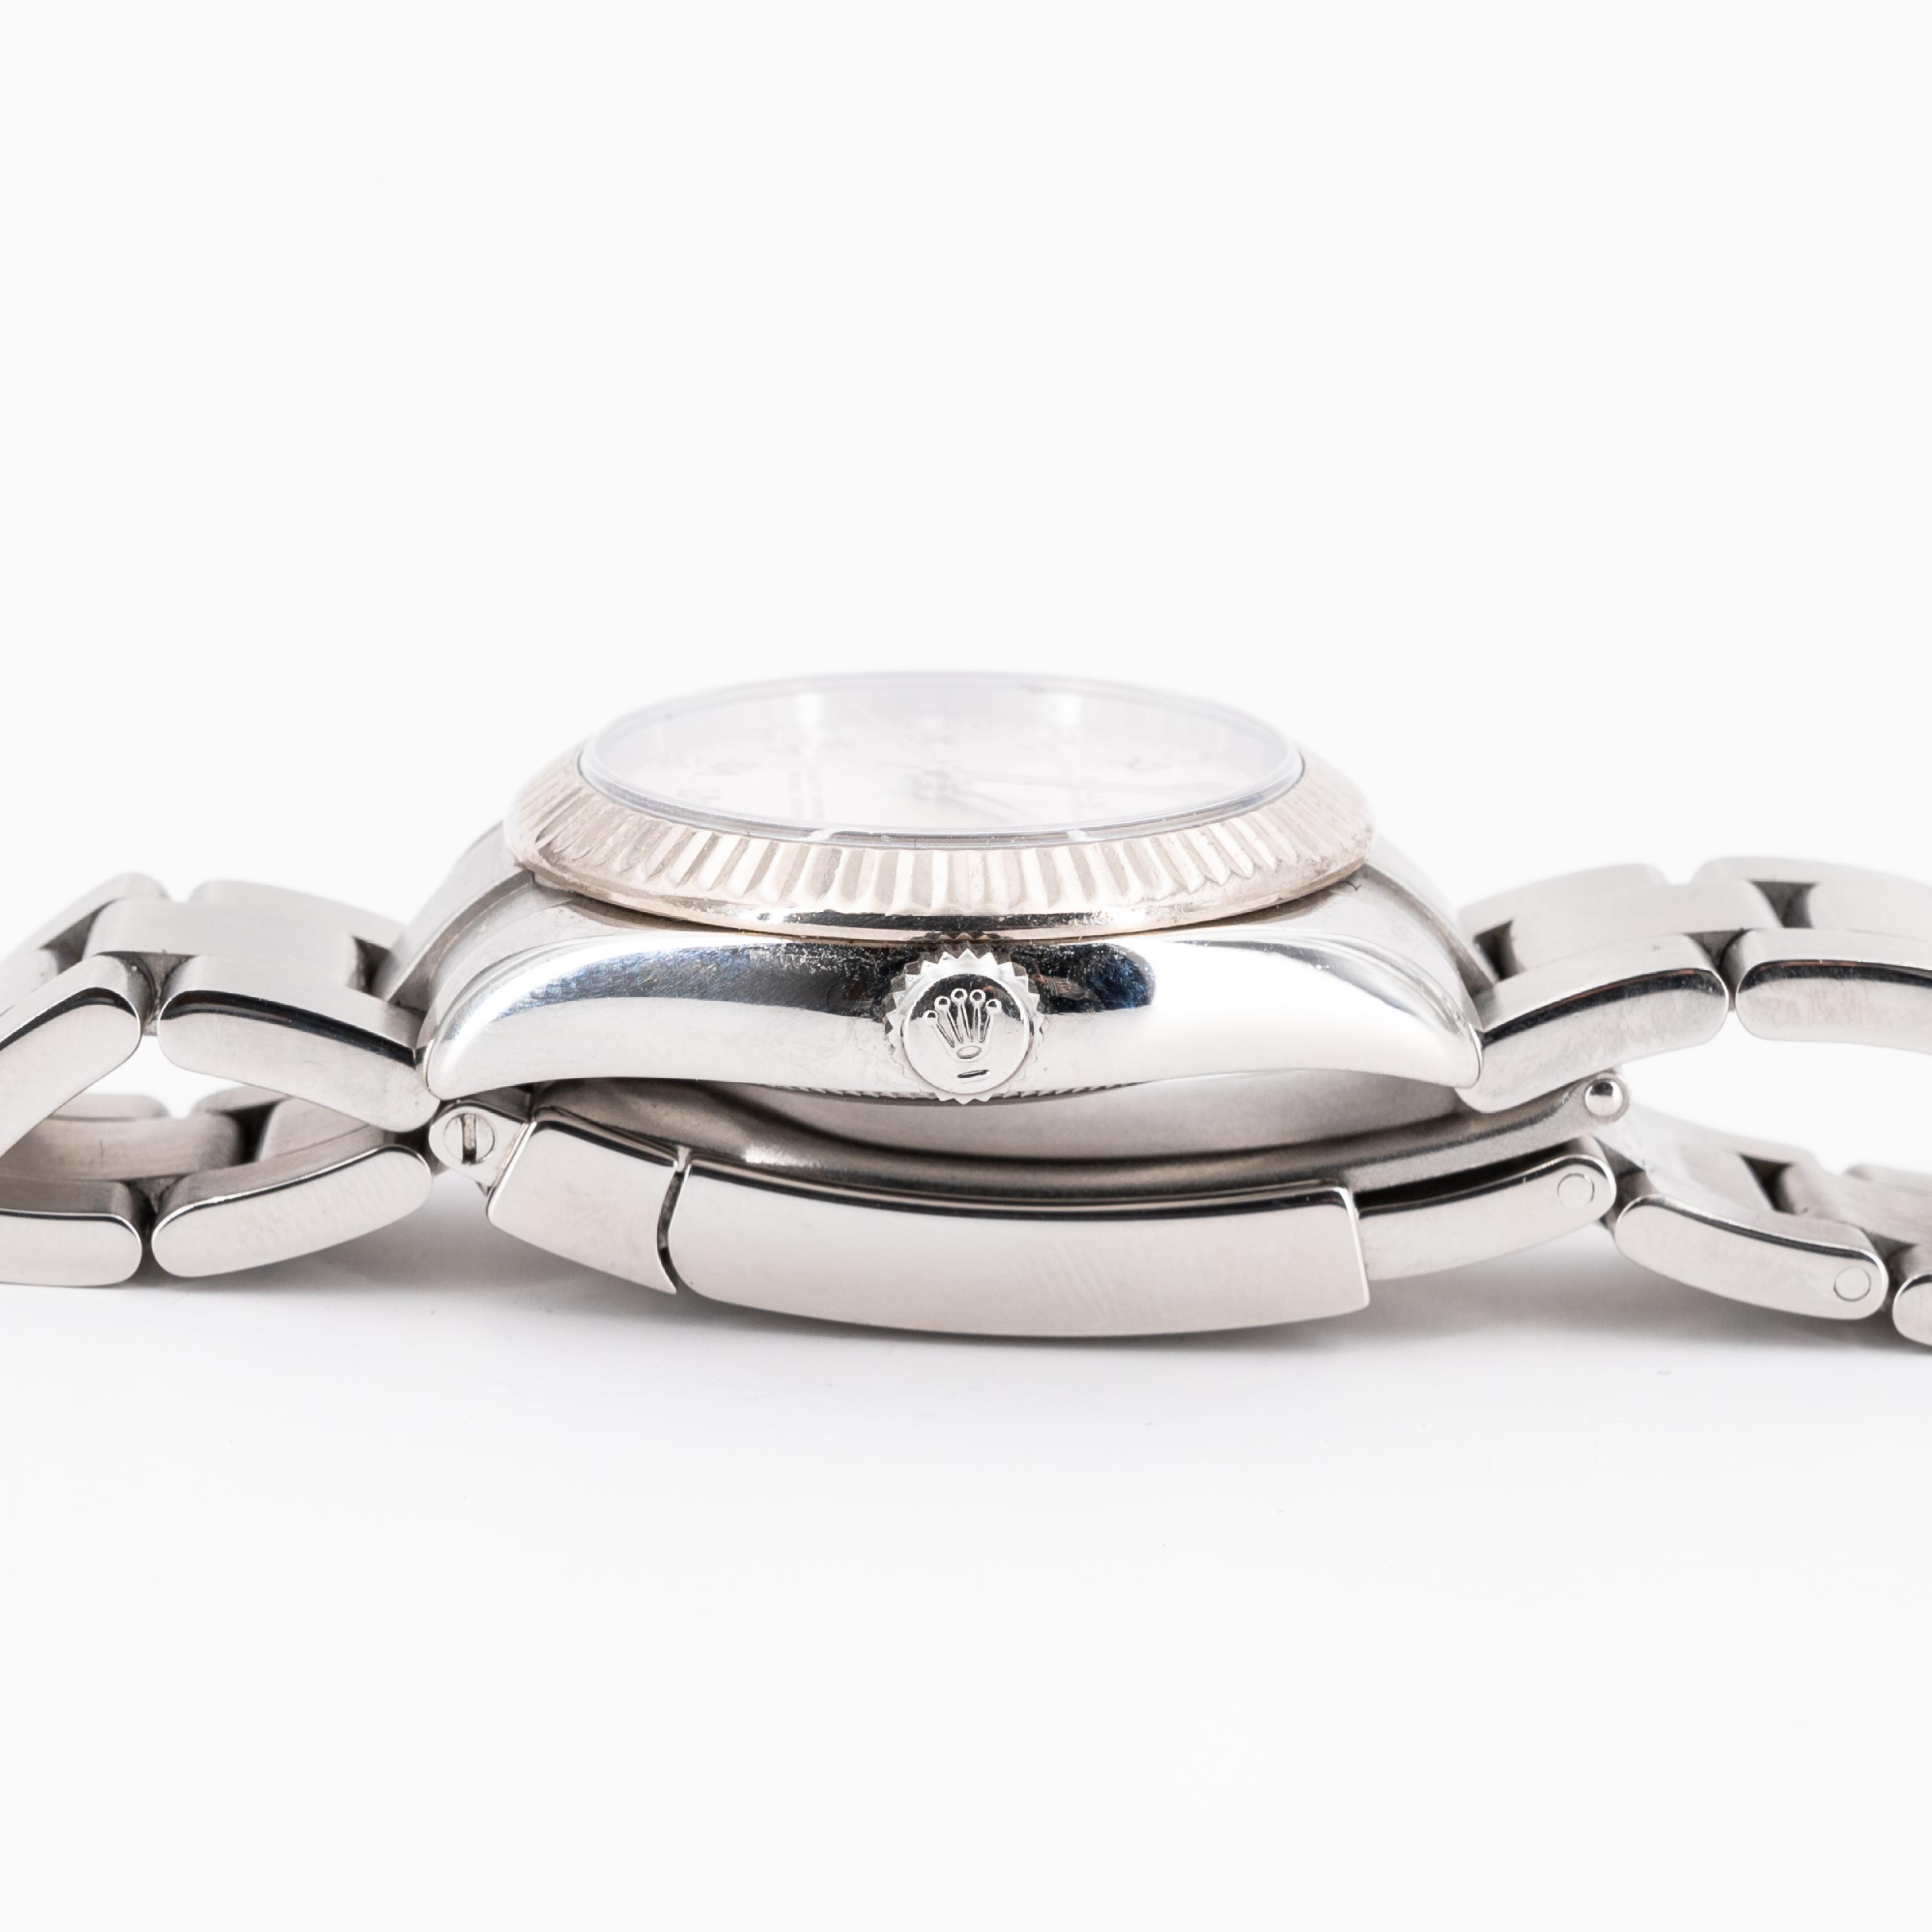 Rolex: Oyster Perpetual - Image 5 of 8